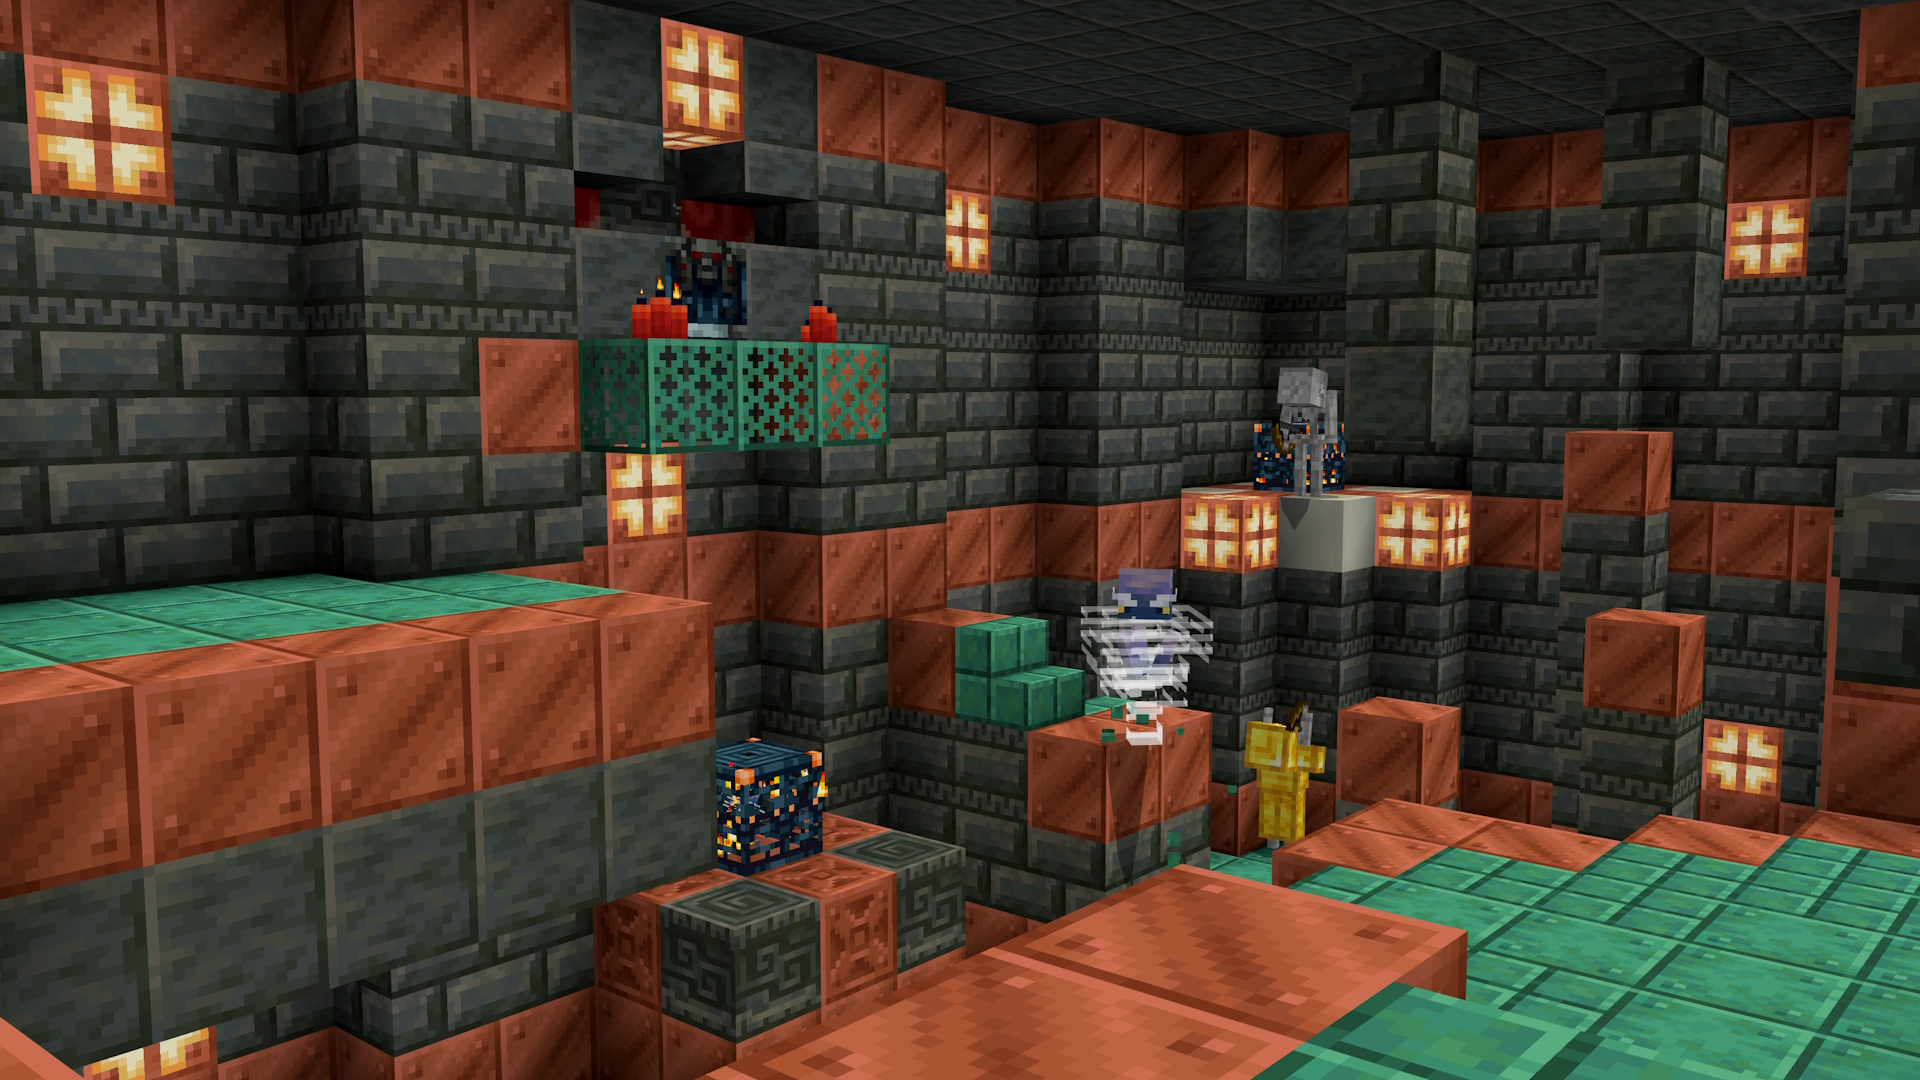 A Minecraft trial chamber with hostile mobs.